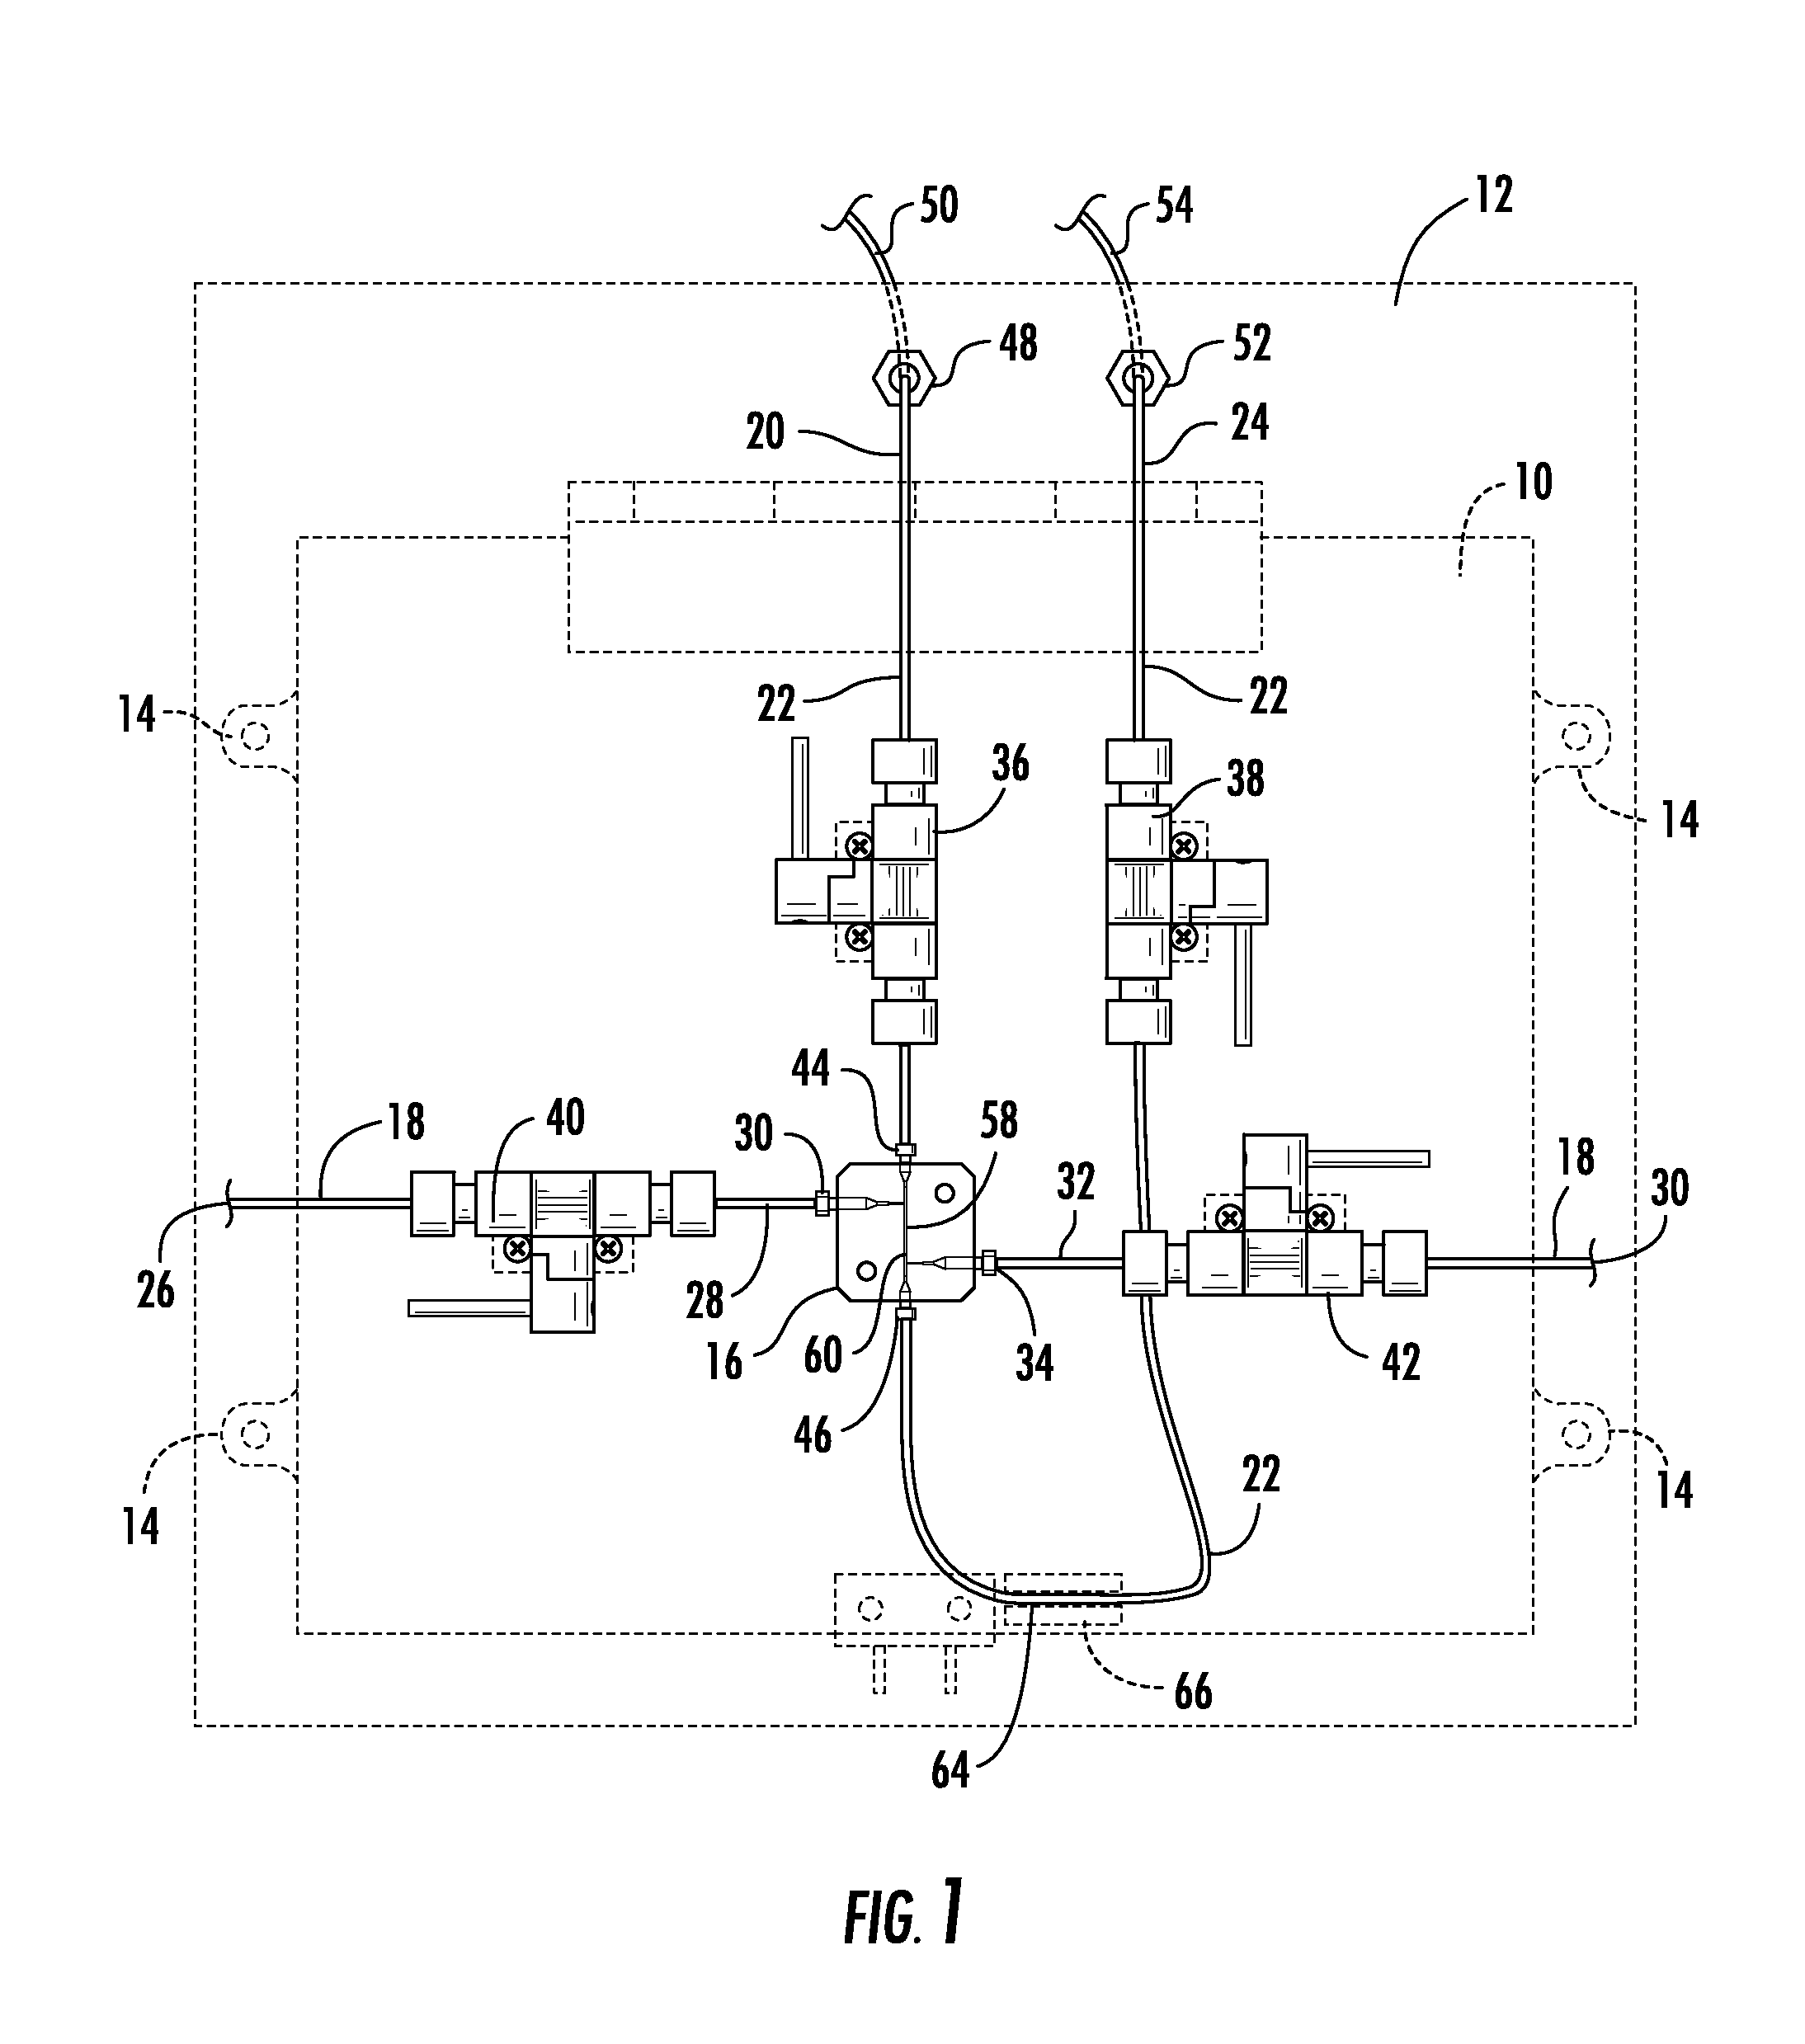 Multi-task immunoaffinity device secured to a peripheral box and integrated to a capillary electrophoresis apparatus